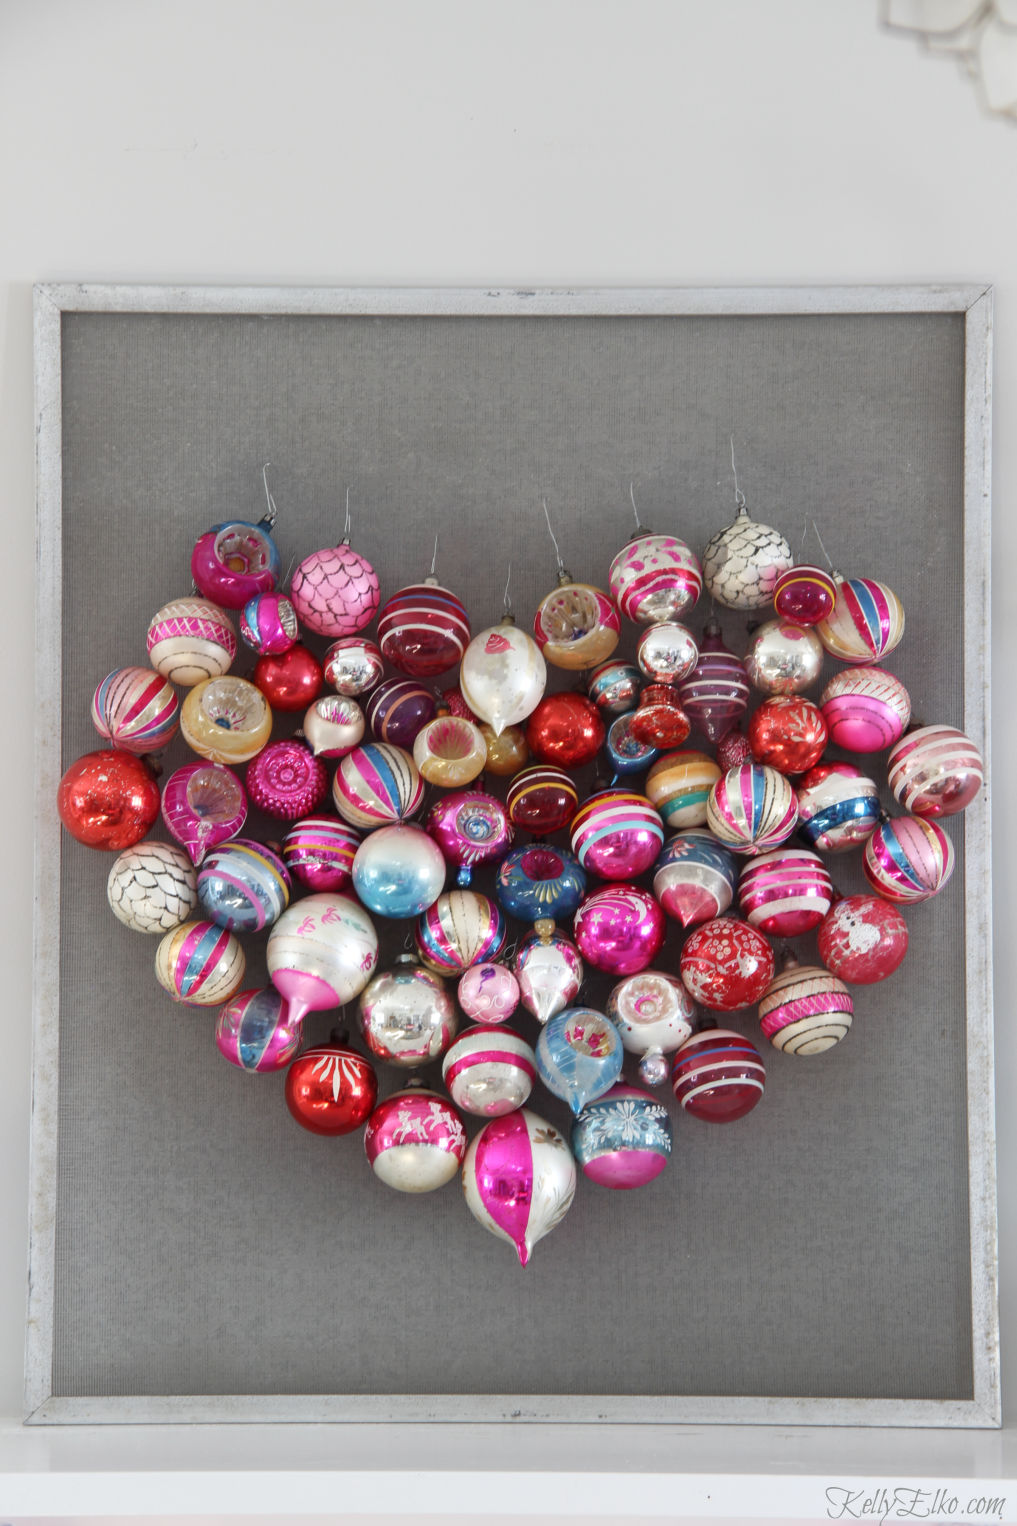 How to make a Christmas ornament Valentine heart screen kellyelko.com #valentines #valentinecraft #valentinesday #christmasornaments #vintageornaments #shinybrites #valentinedecor #valentinesdaydecor #valentinesparty #hearts #diycrafts 